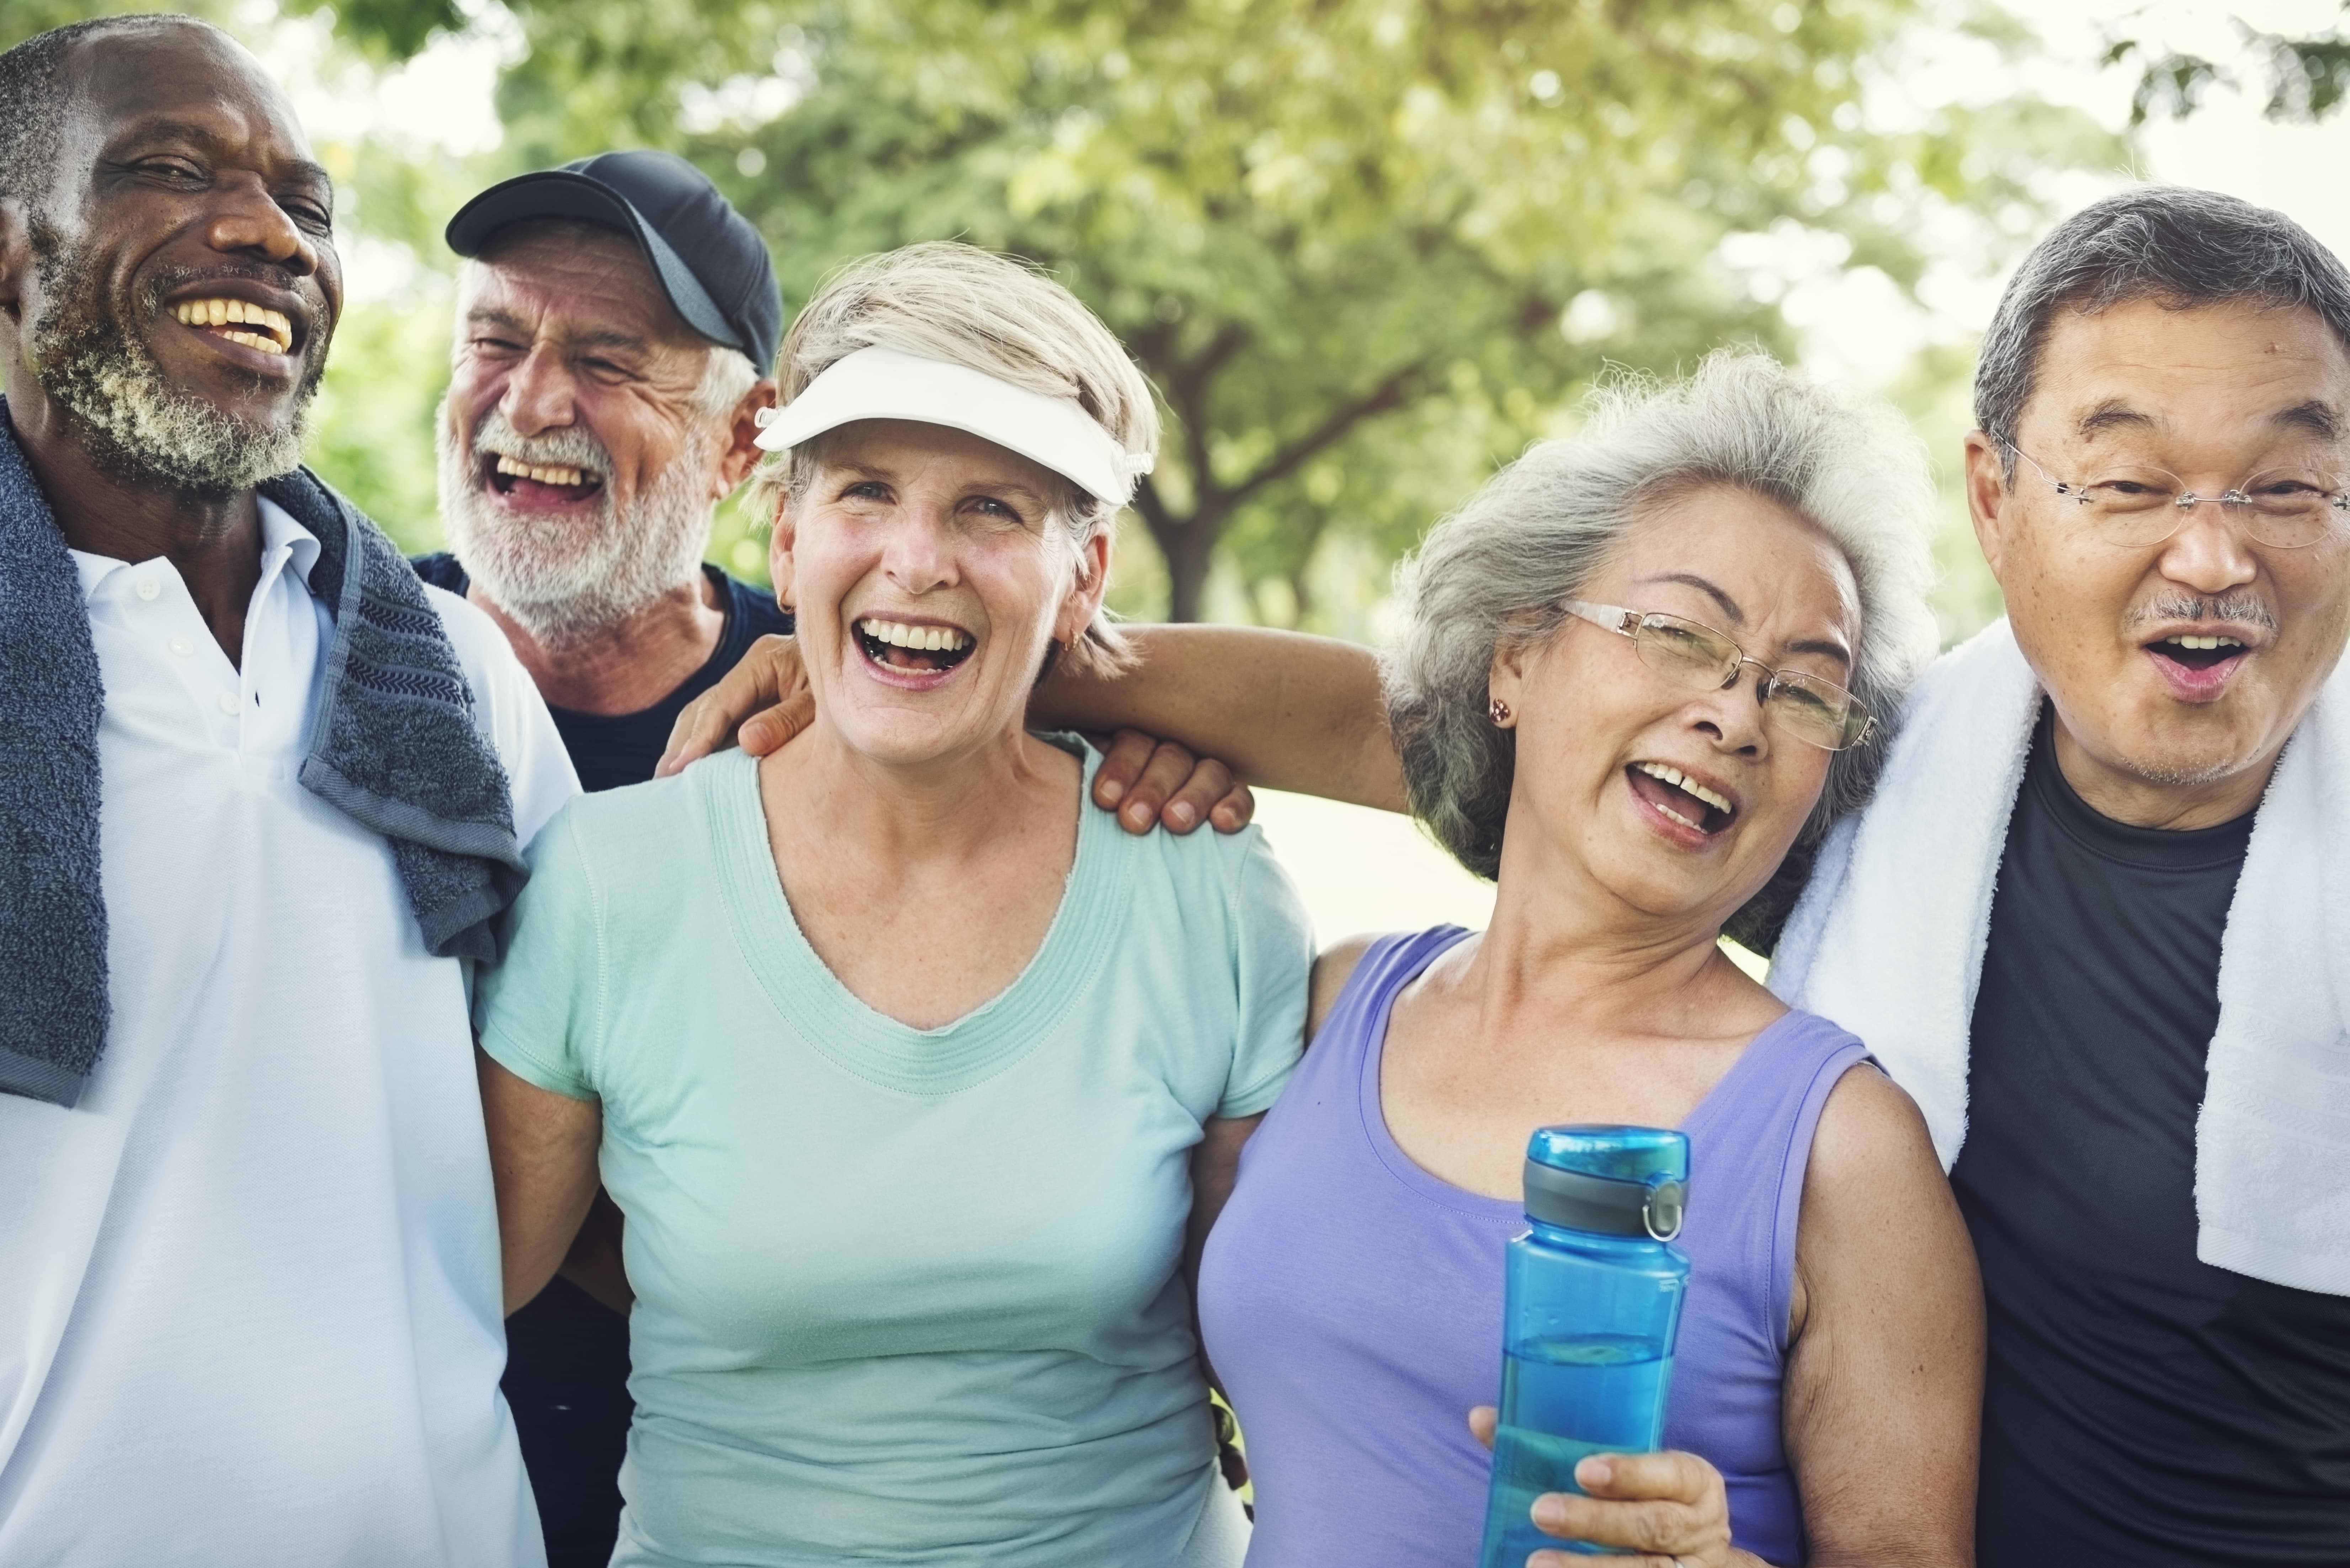 Age-friendly communities can help older adults live active, vibrant lives with local support